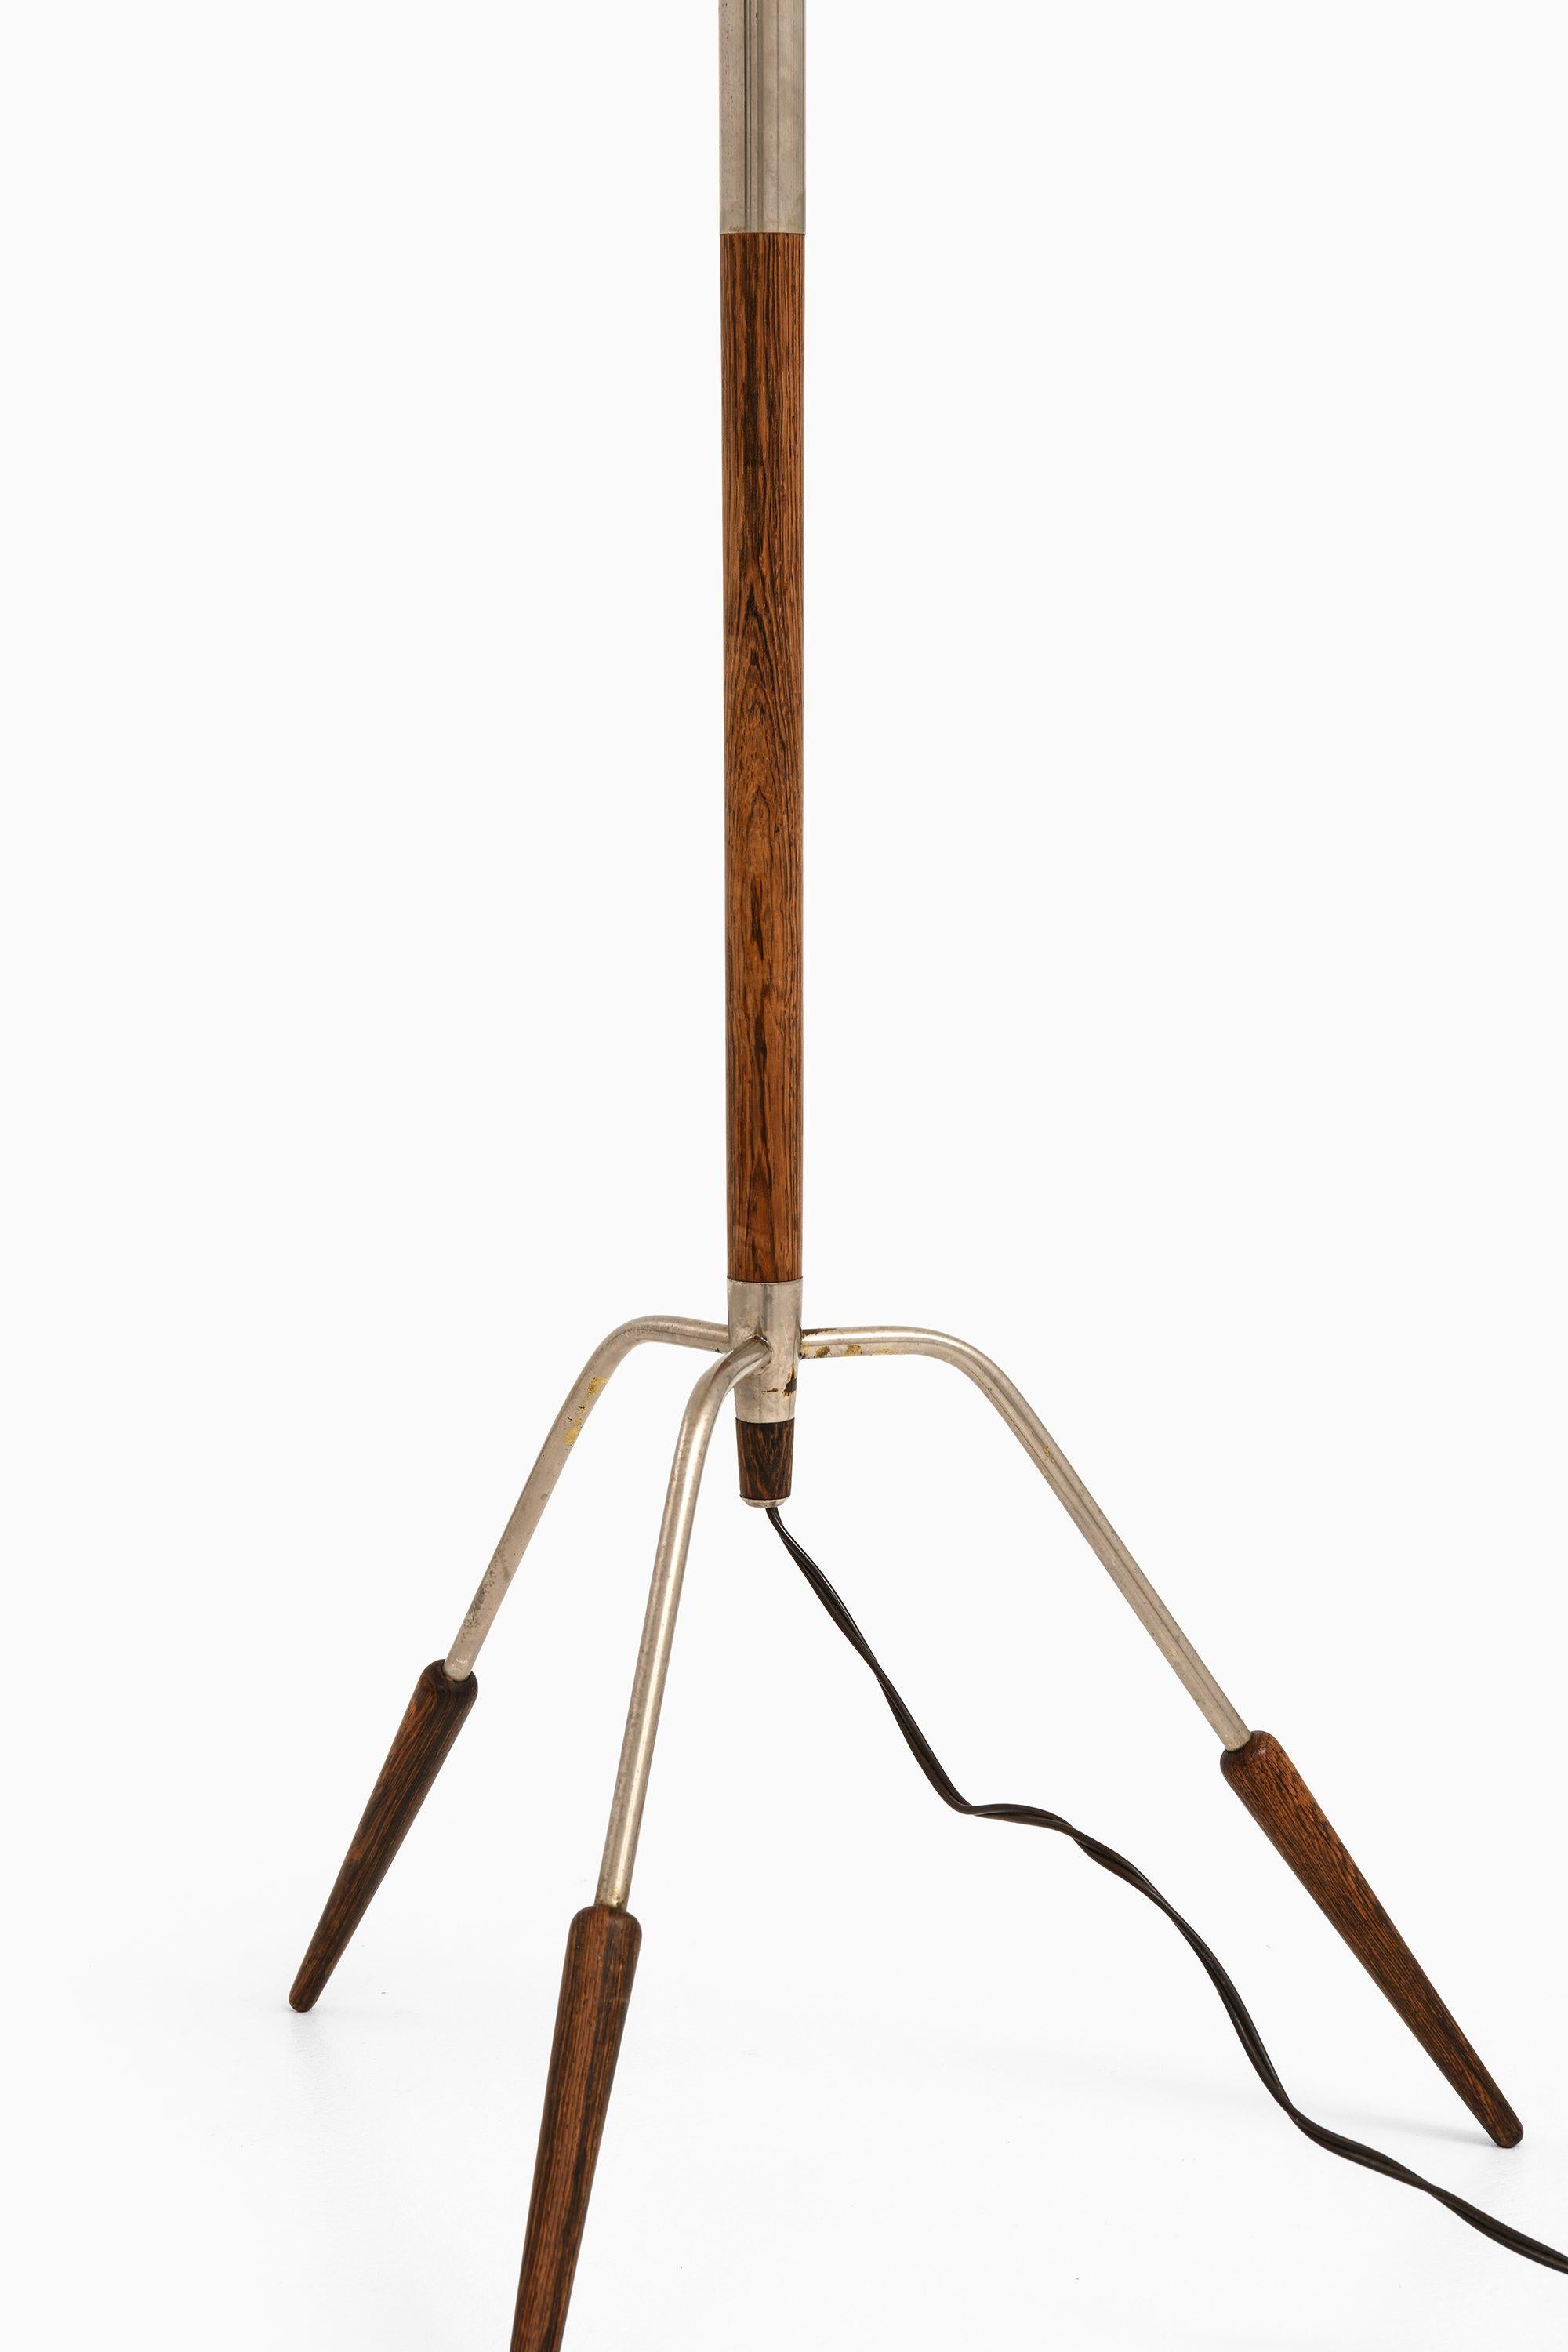 Scandinavian Modern Tripod Floor Lamp in Rosewood and Steel Attributed to Jo Hammerborg, 1960's For Sale